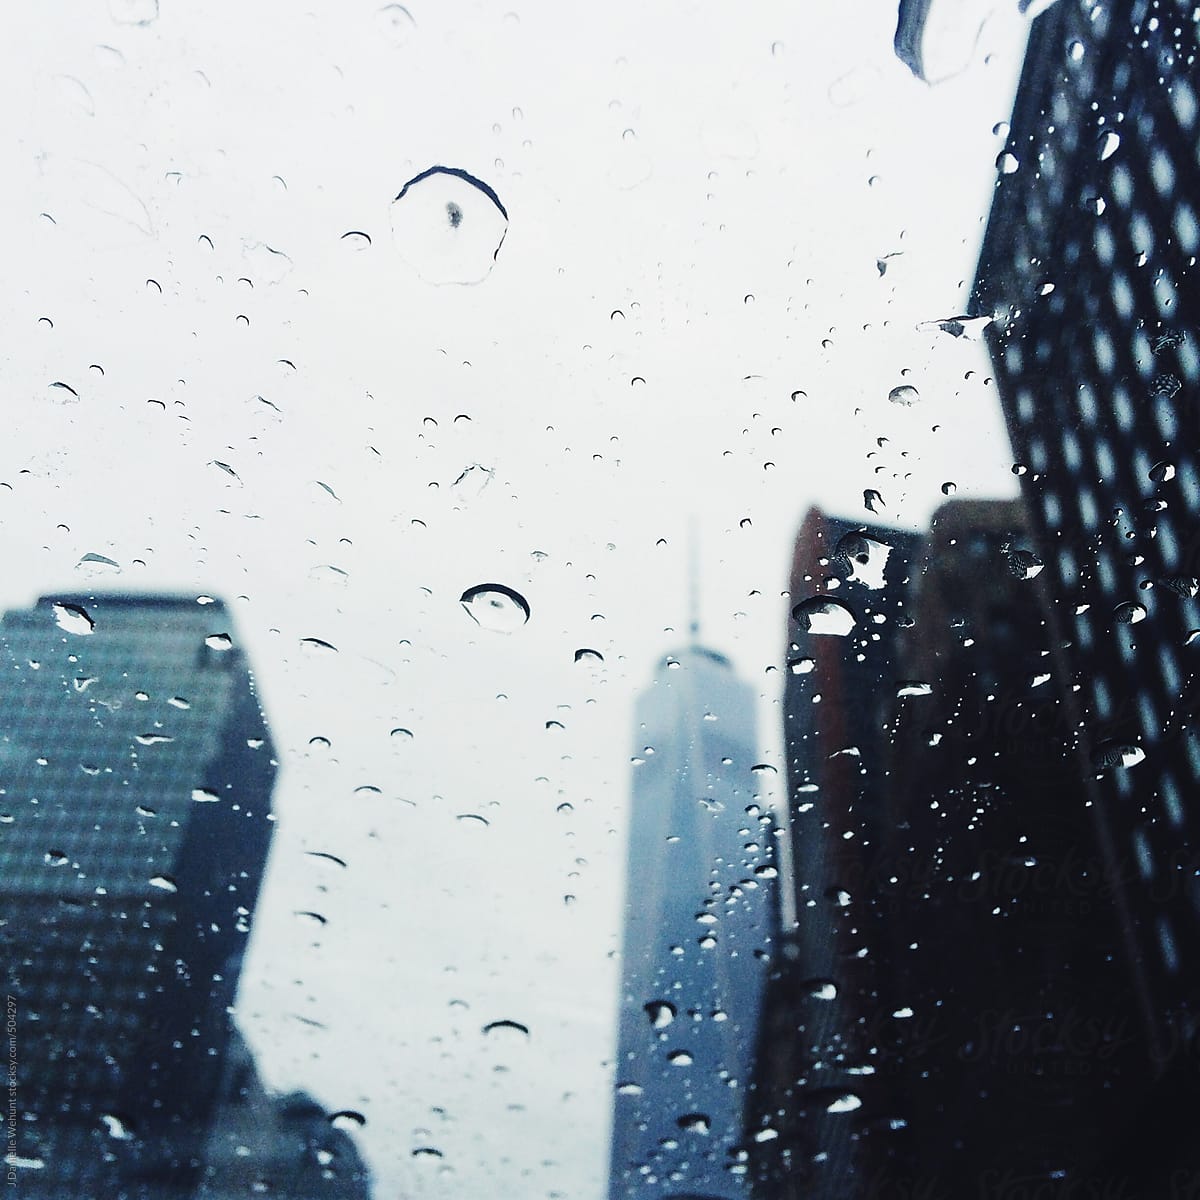 A view of the World Trade Building through a sun roof on a rainy day.